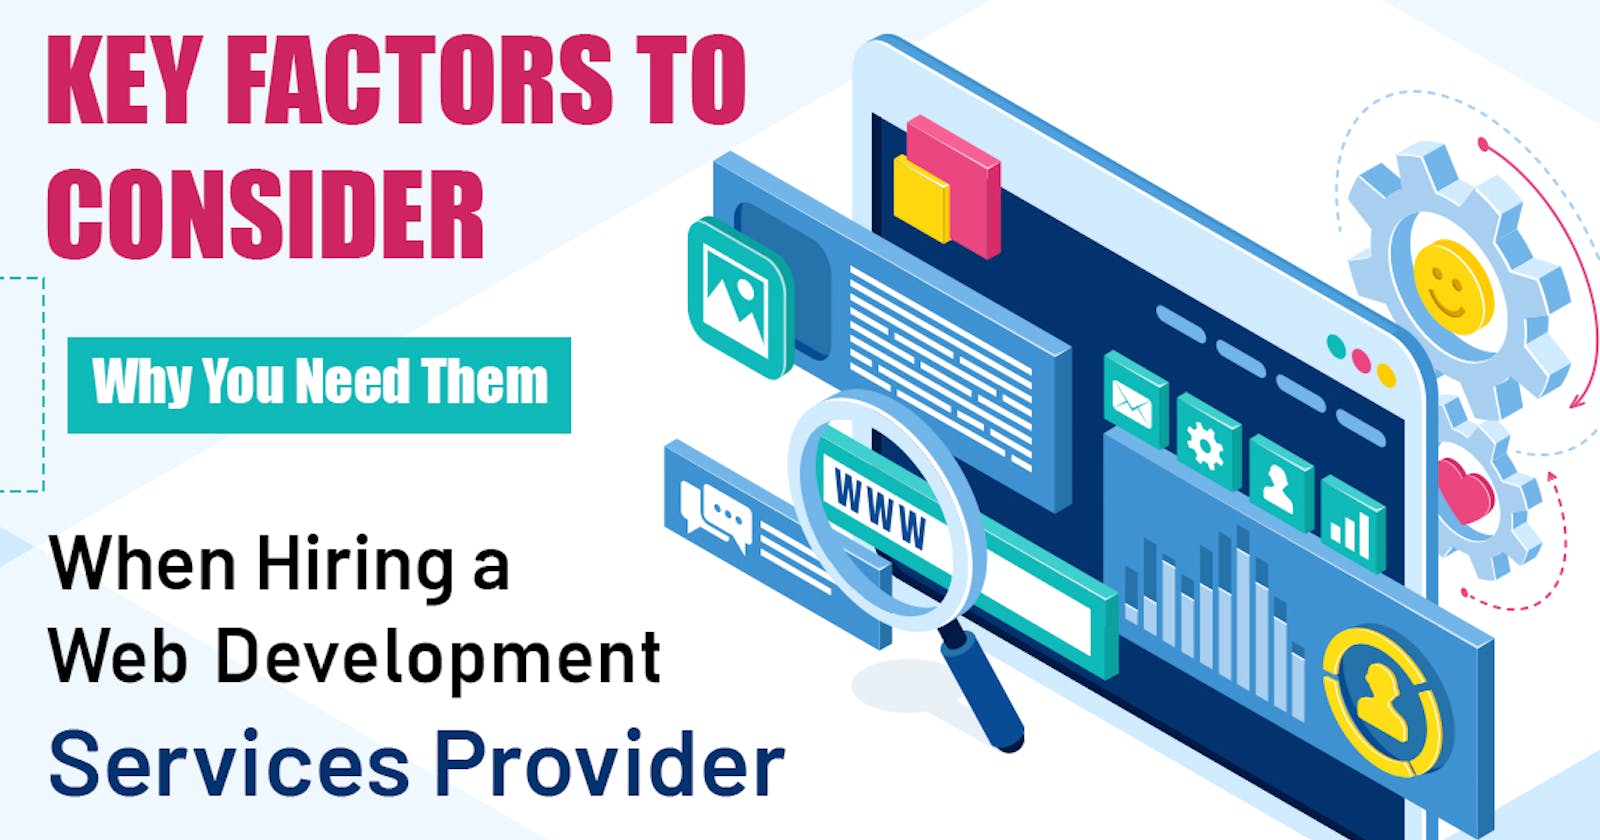 Key Factors to Consider When Hiring a Web Development Services Provider